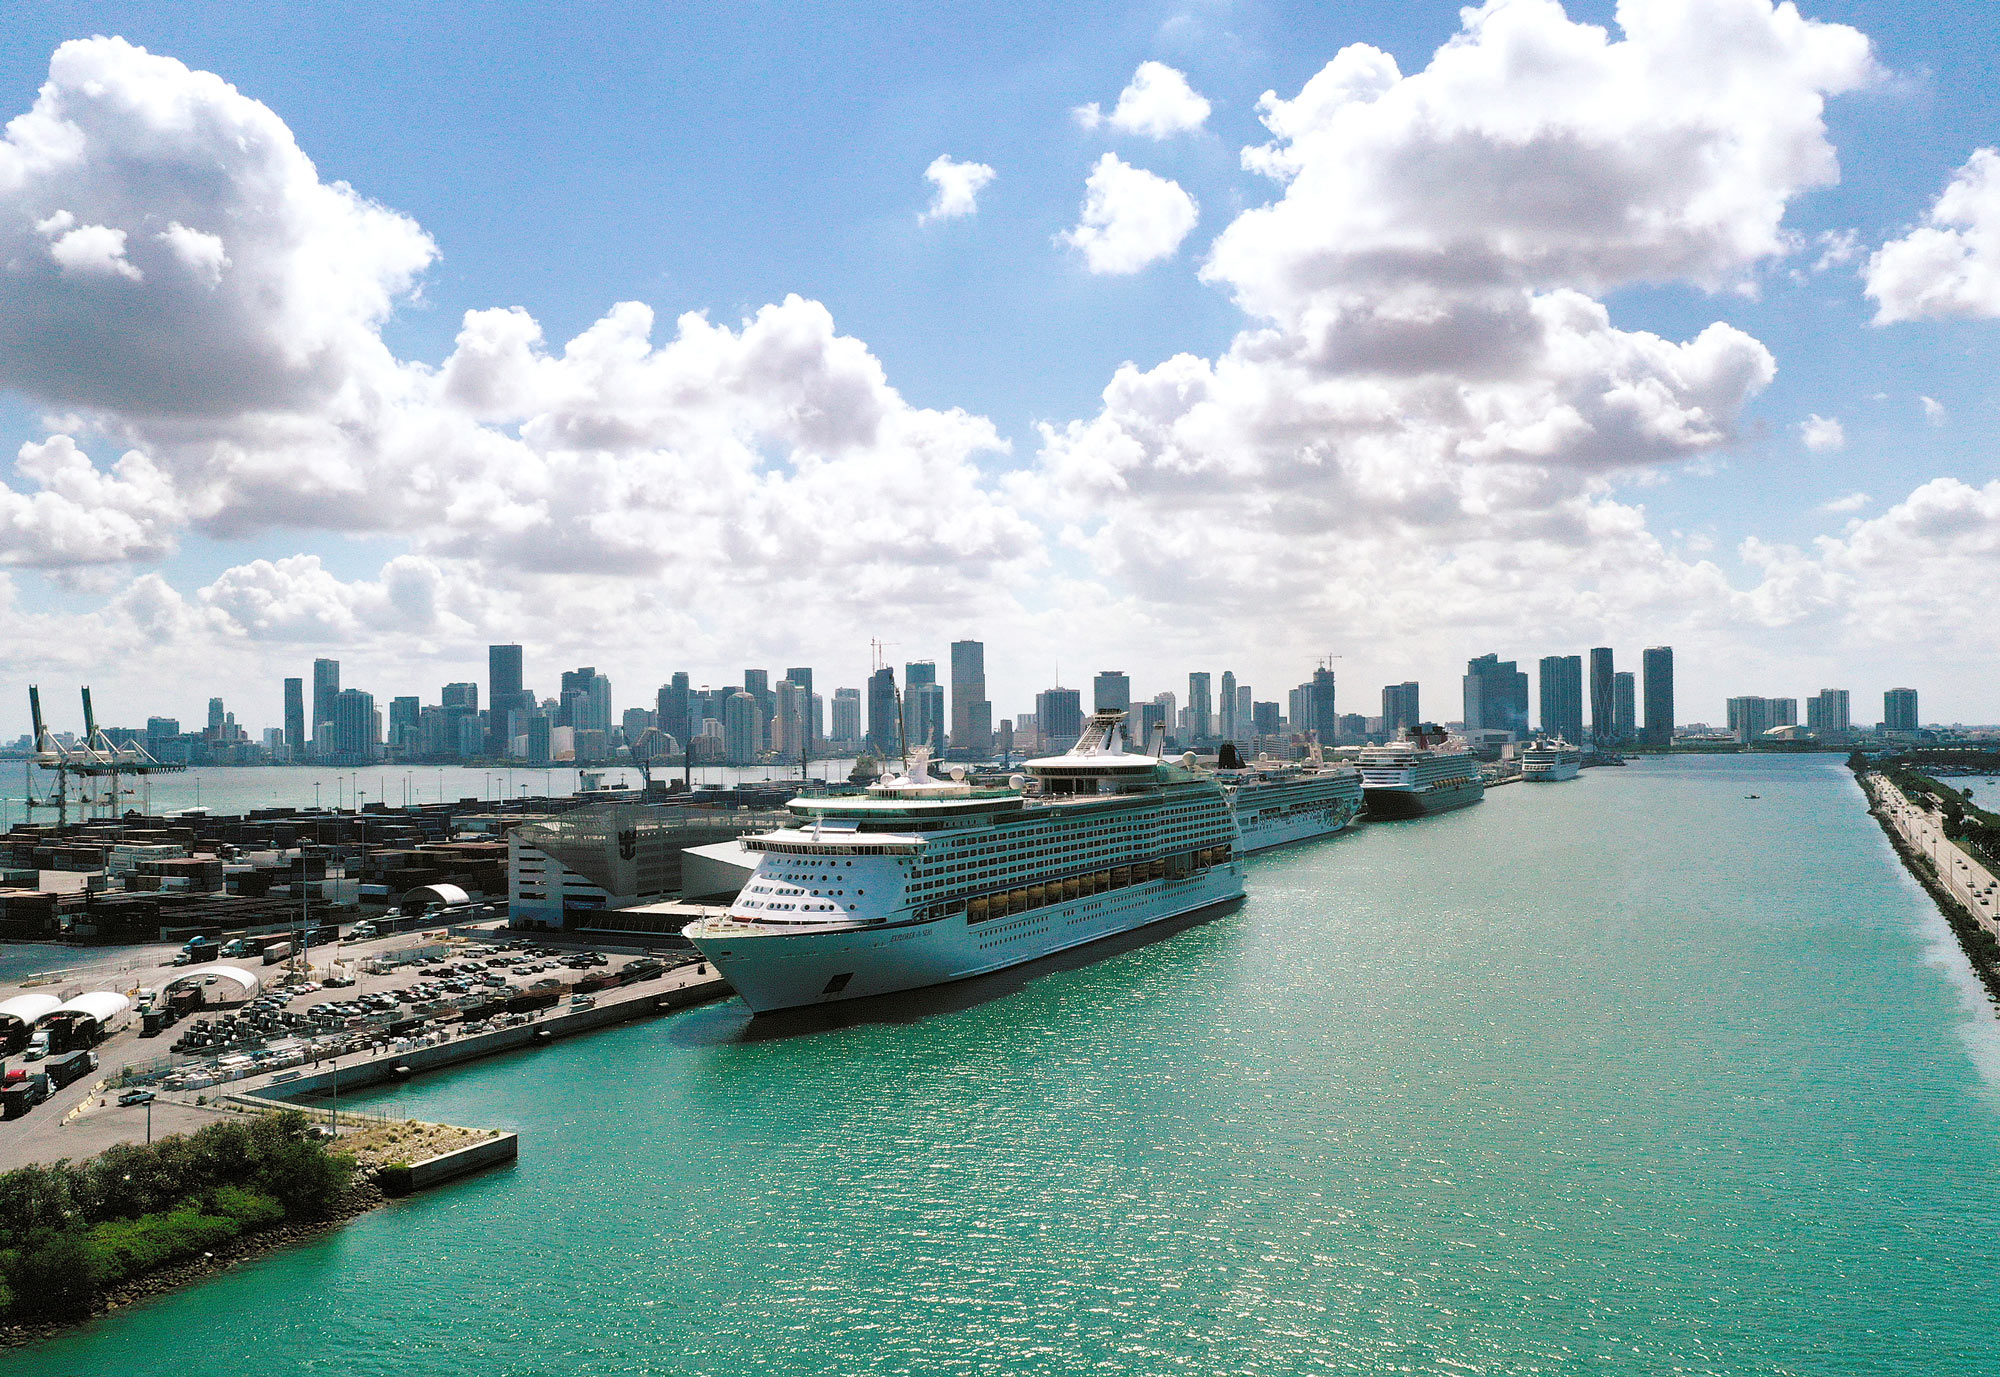 Cruise ships sit docked at PortMiami on May 26 in Miami.